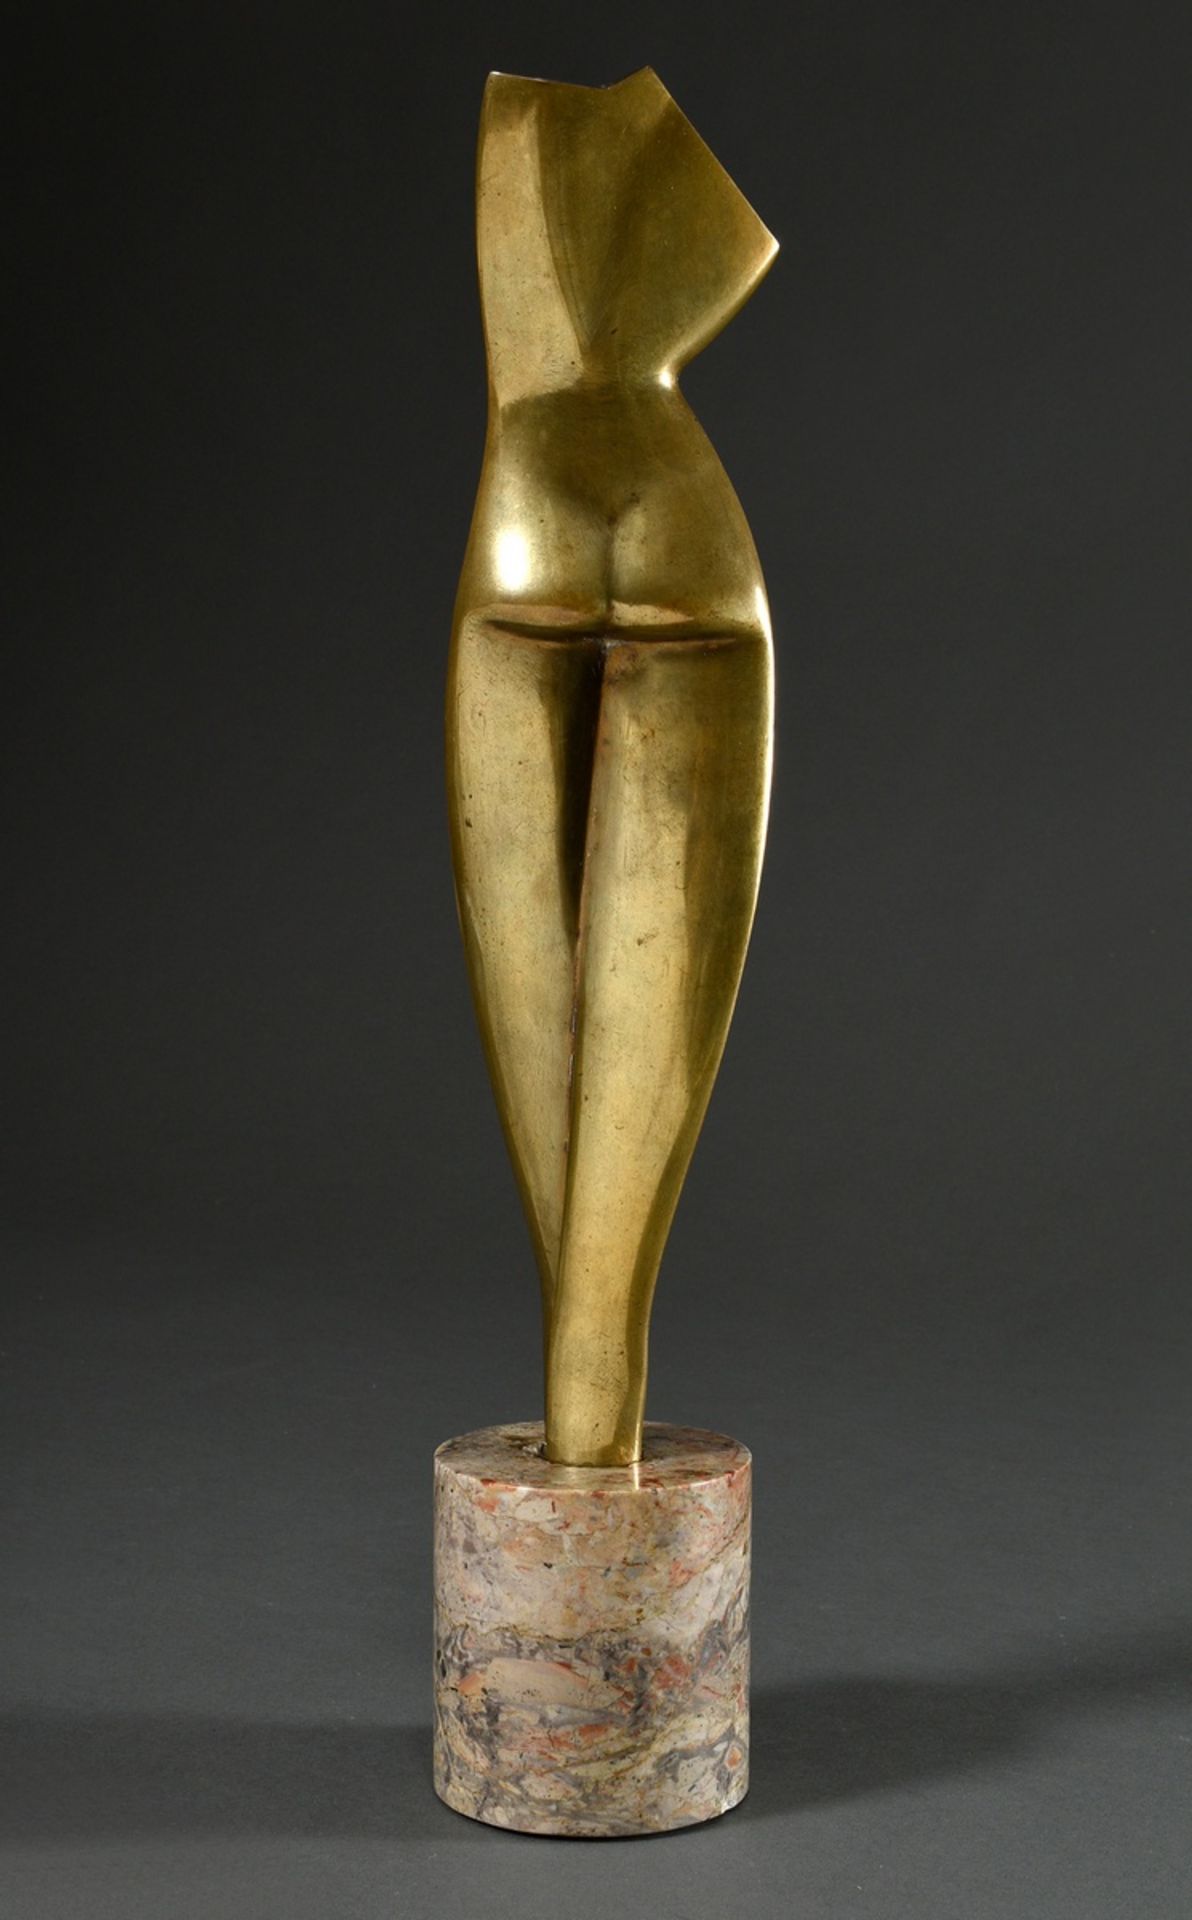 Archipenko, Alexander (1887-1964) "Flat Torso" 1914, early life cast around 1920, bronze with gold- - Image 5 of 17